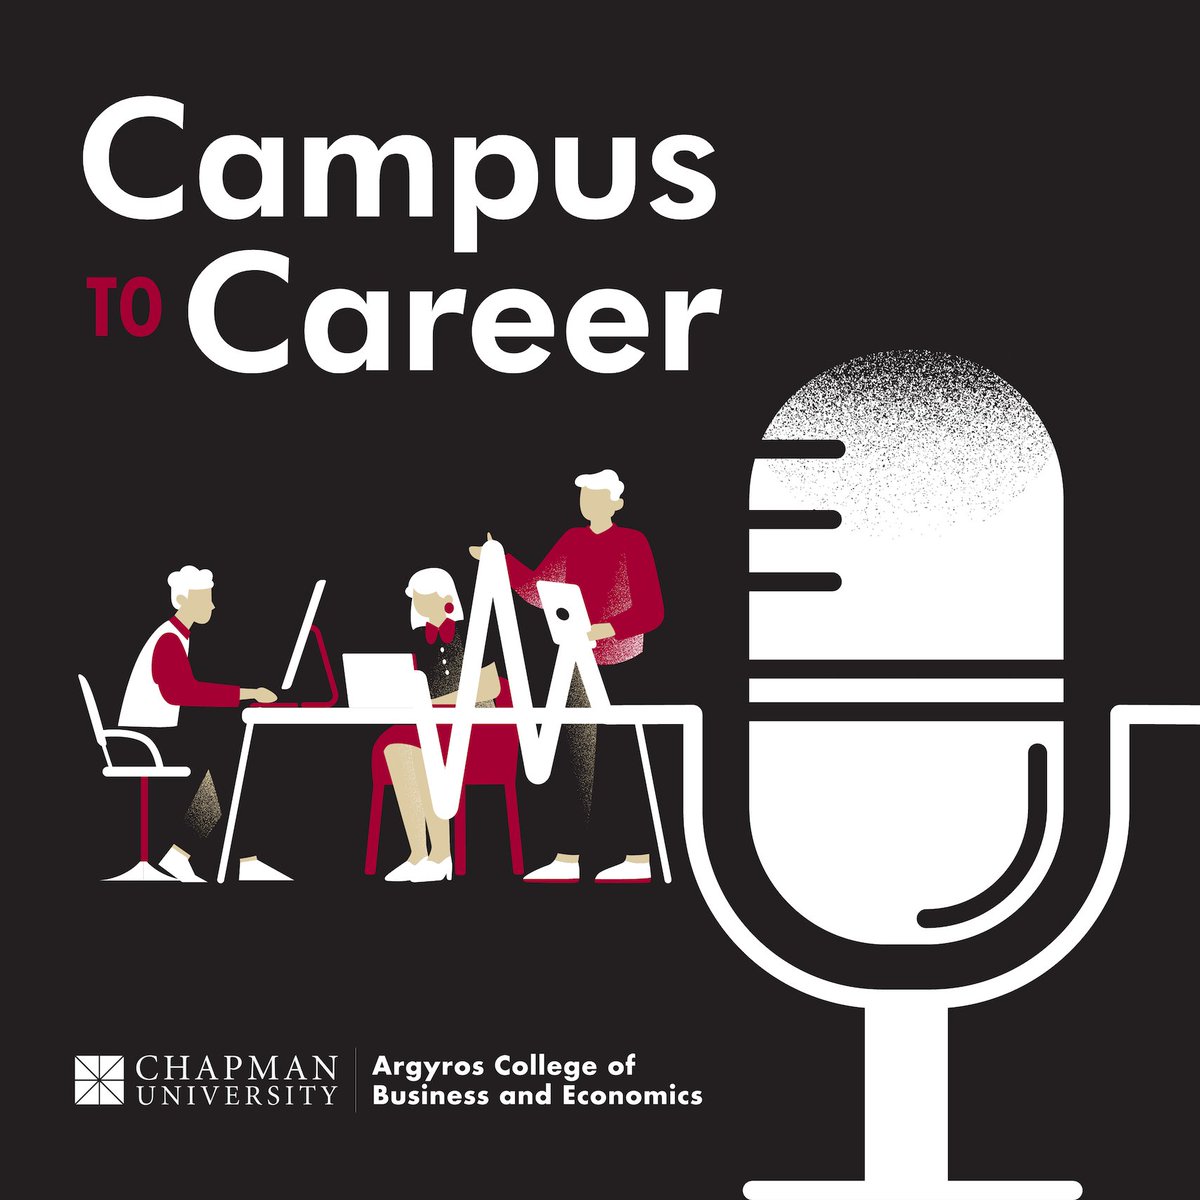 Surprise! 🎉 Our Campus to Career series is now also a podcast! Listen to the stories of our amazing alumni wherever you listen to your podcasts! Apple: apple.co/46eSiqT Spotify: spoti.fi/3QxNmYc #ChapmanArgyros #CampustoCareer #ChapmanUAlumni